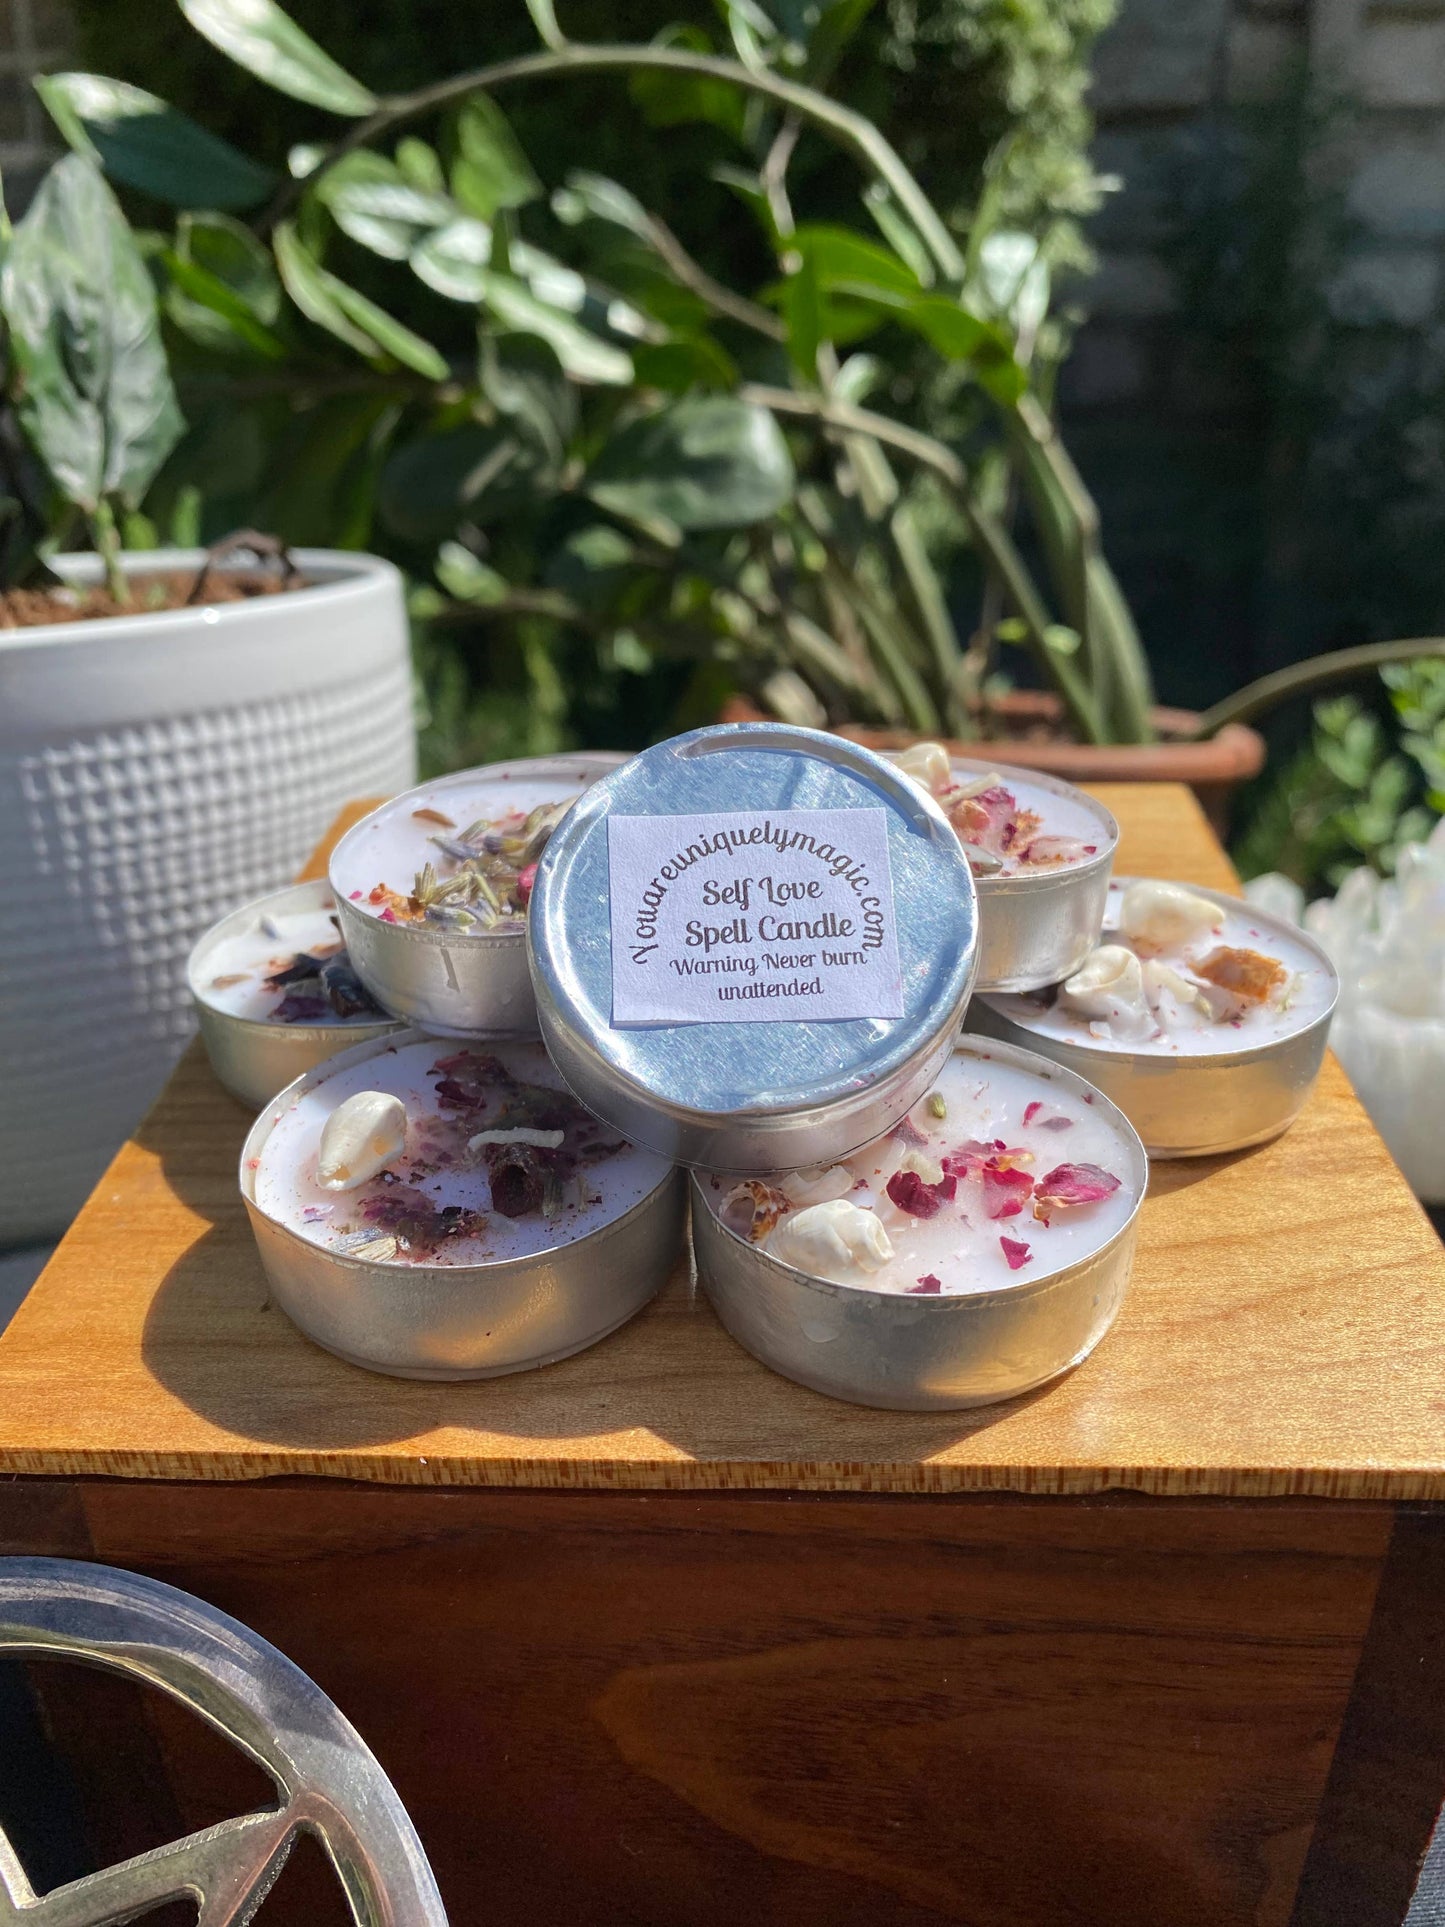 You Are Uniquely Magic - Self Love Tealight Spell Candles